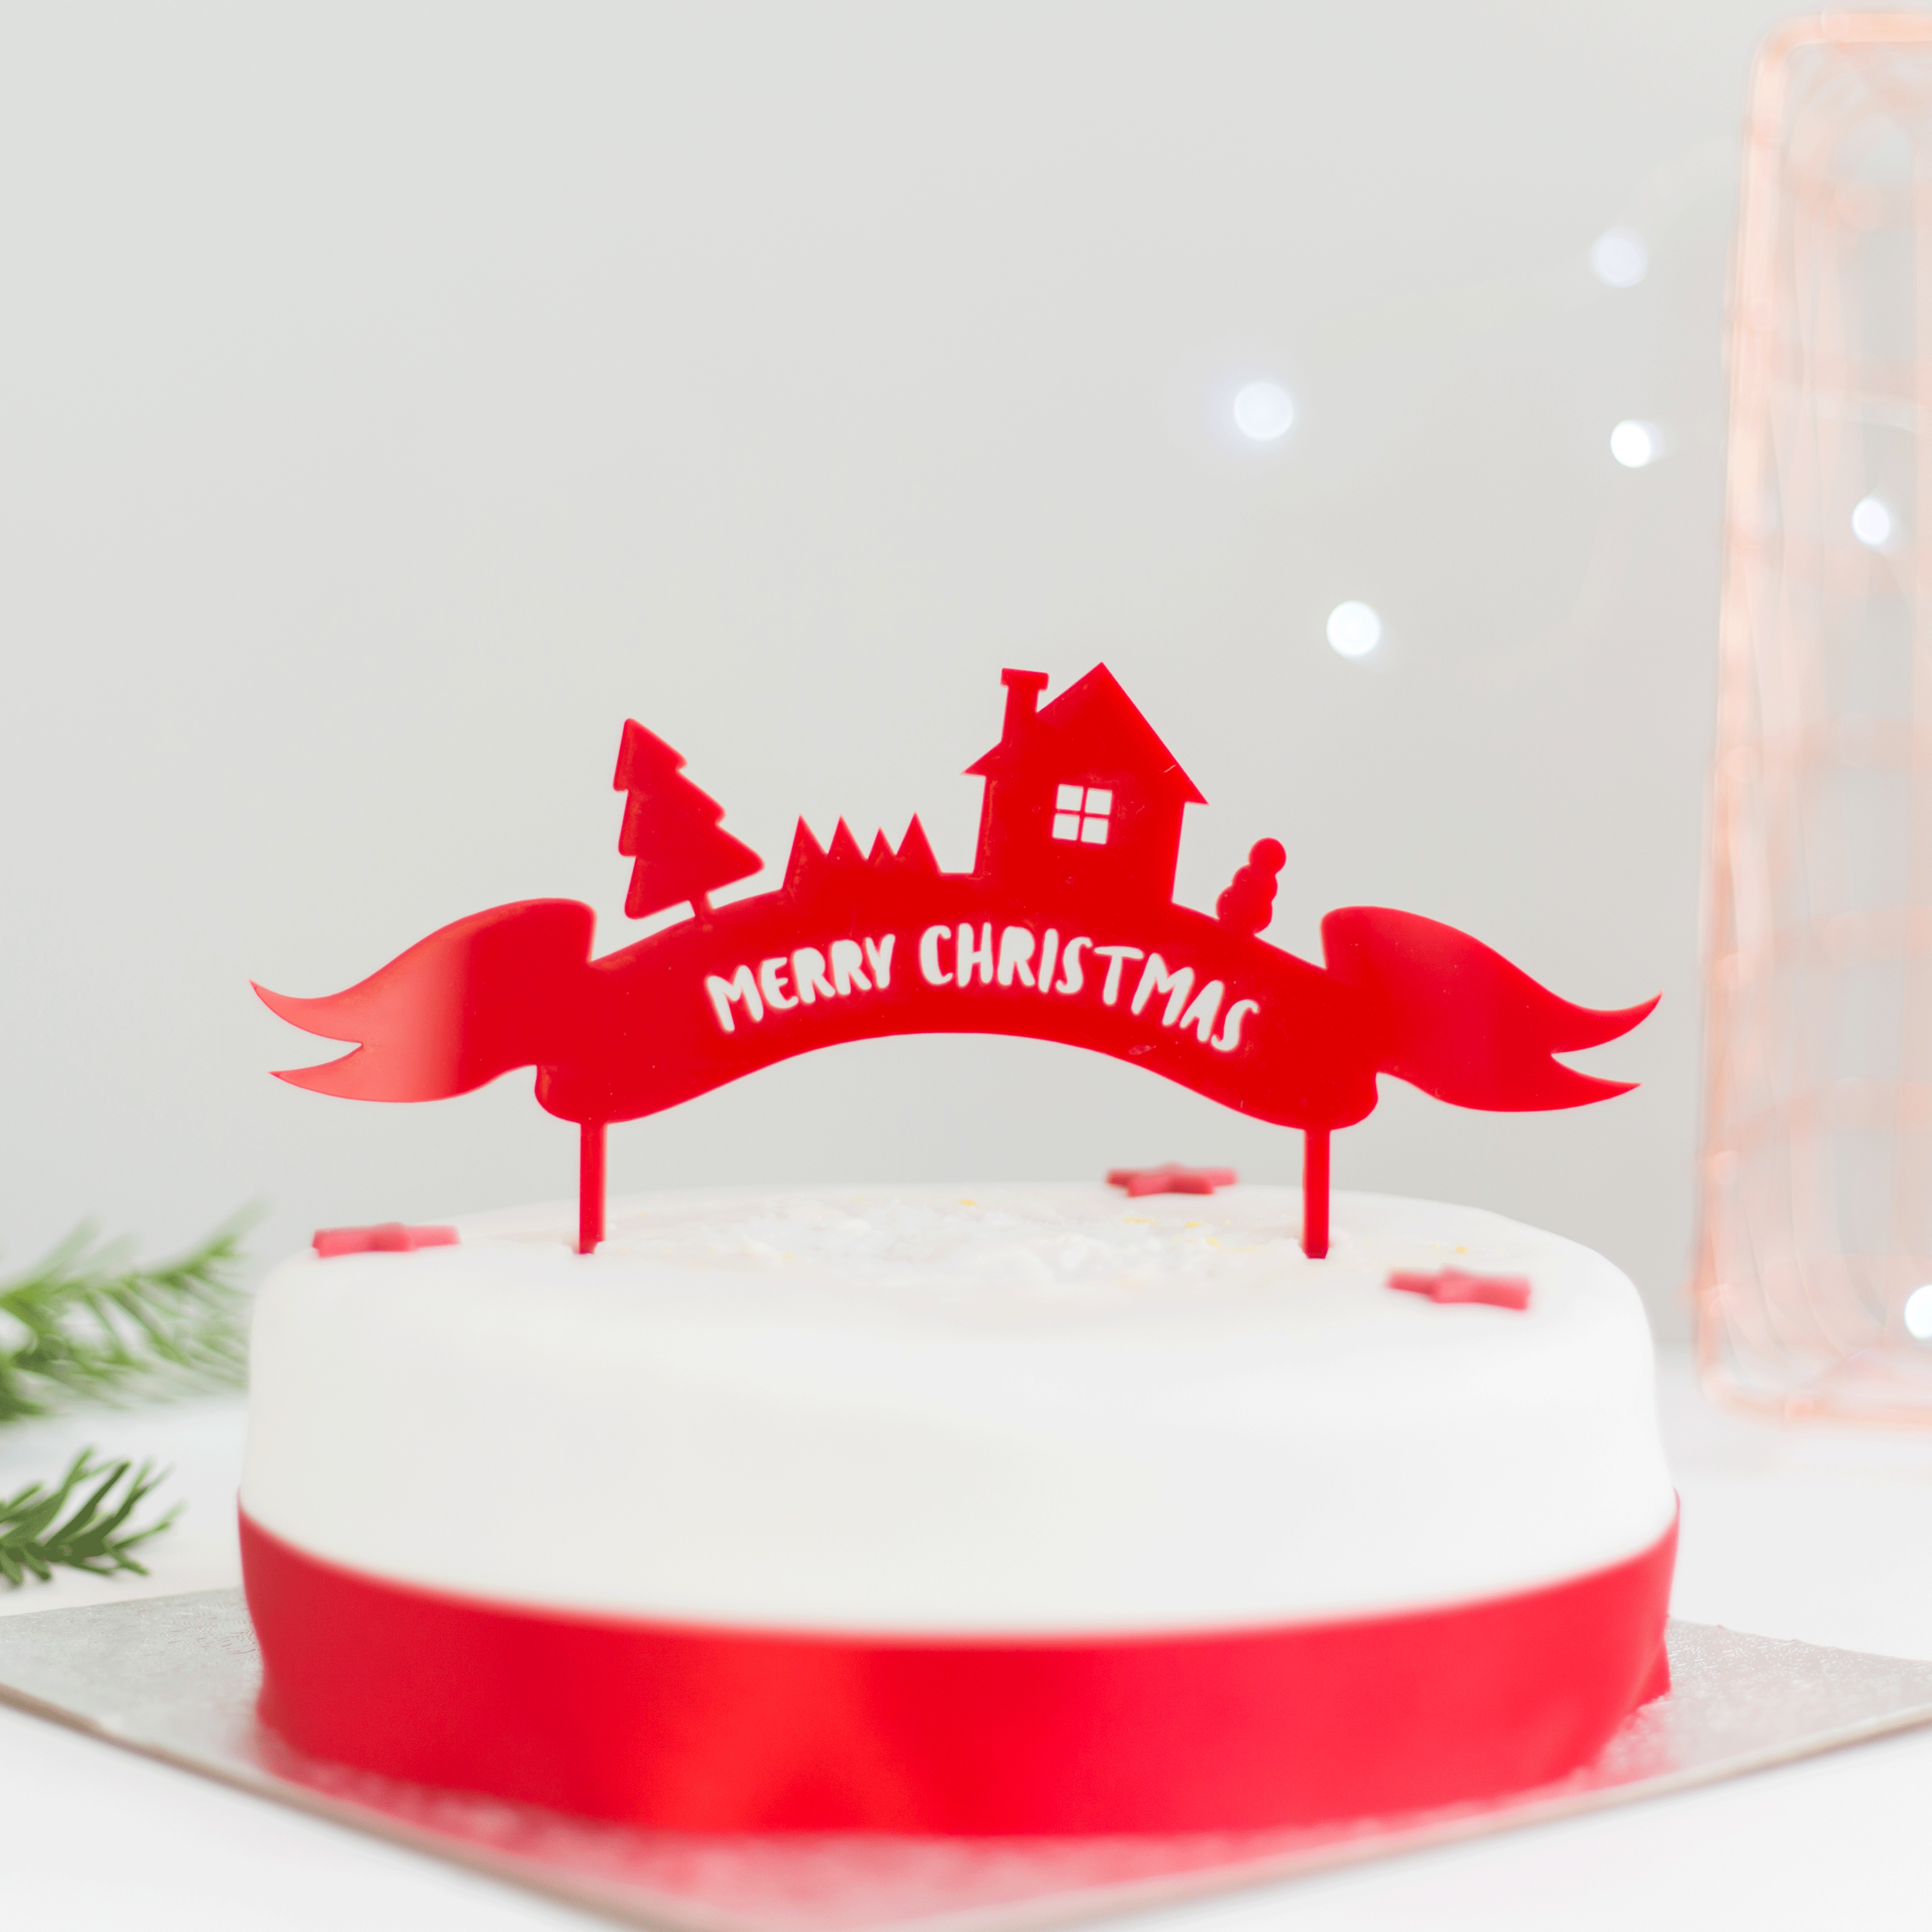 3,905 Christmas Cake Lottie Animations - Free in JSON, LOTTIE, GIF -  IconScout